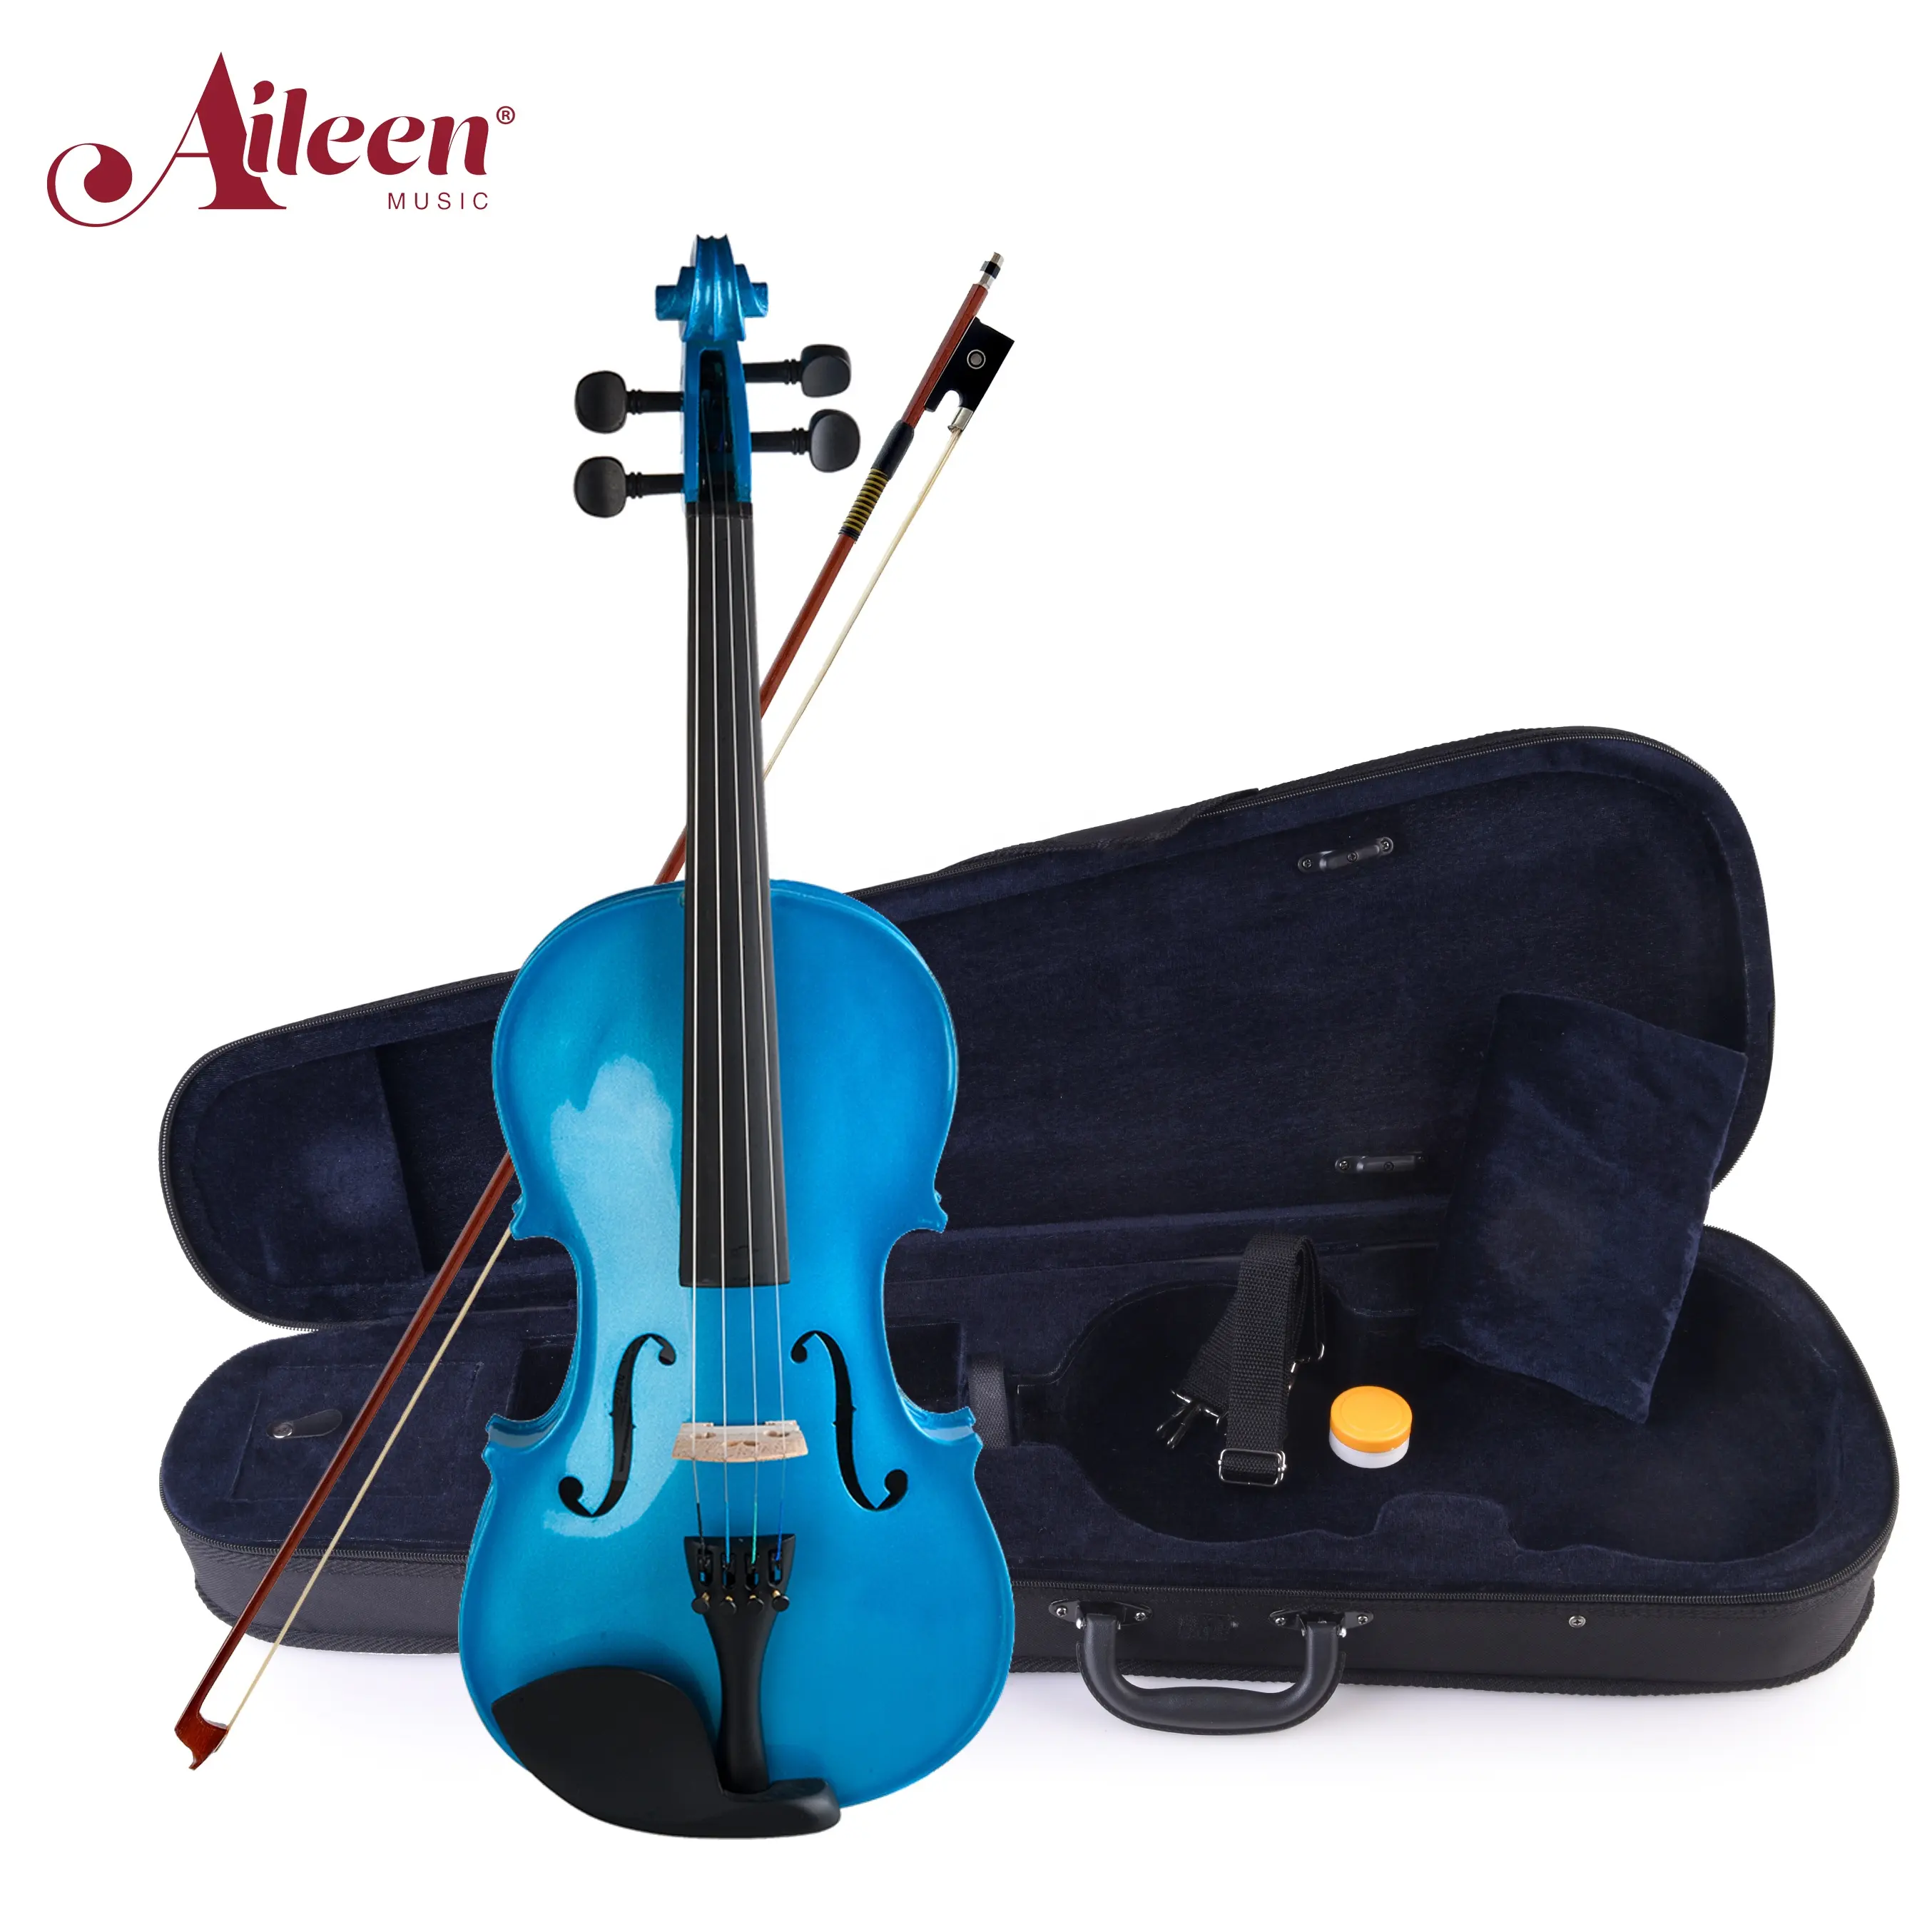 AileenMusic solid color violin from china (VG105)